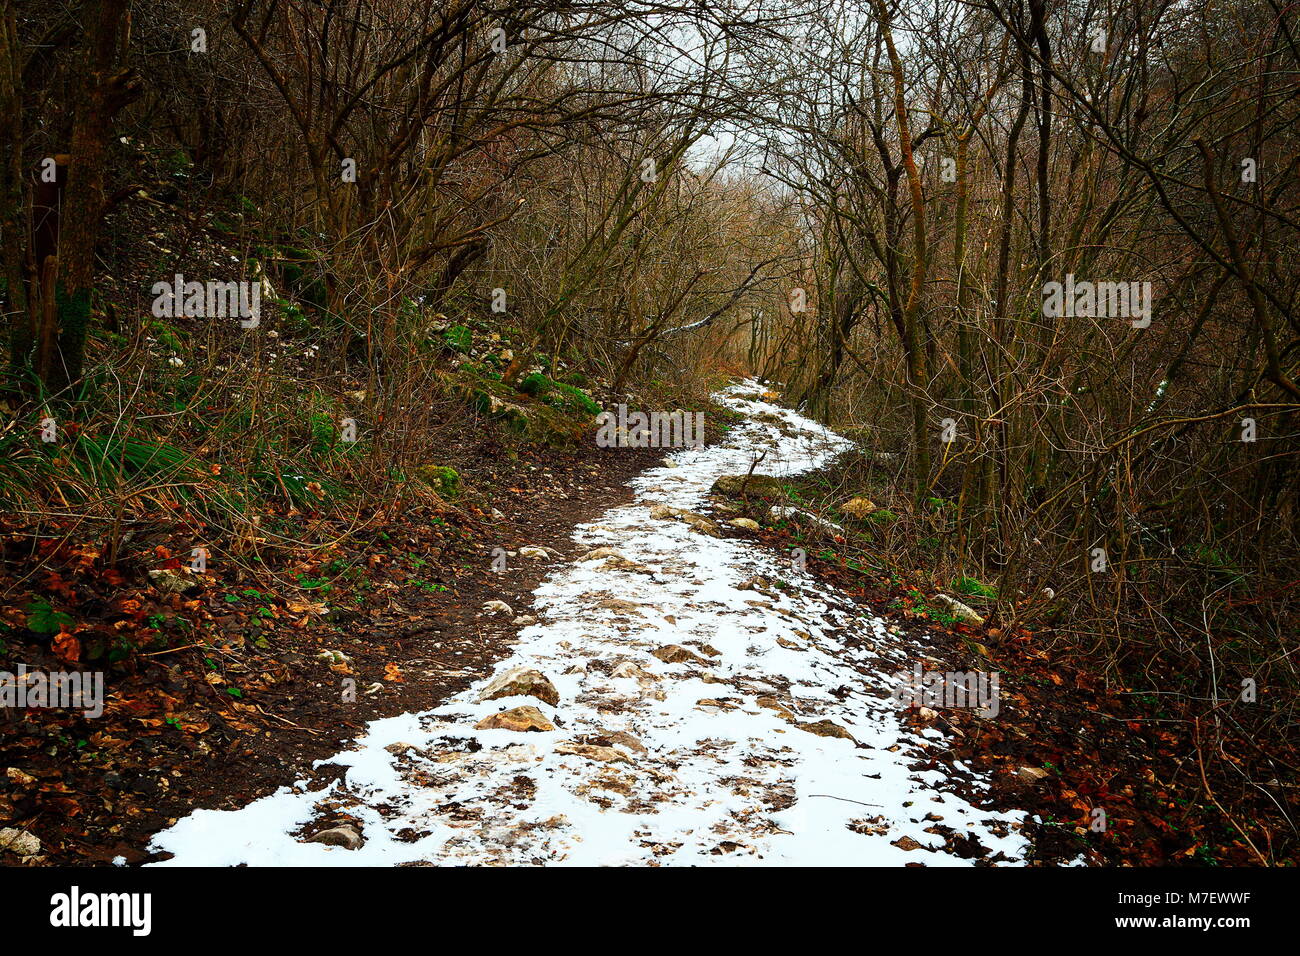 snowy path through the forest, image taken in an overcast february day Stock Photo